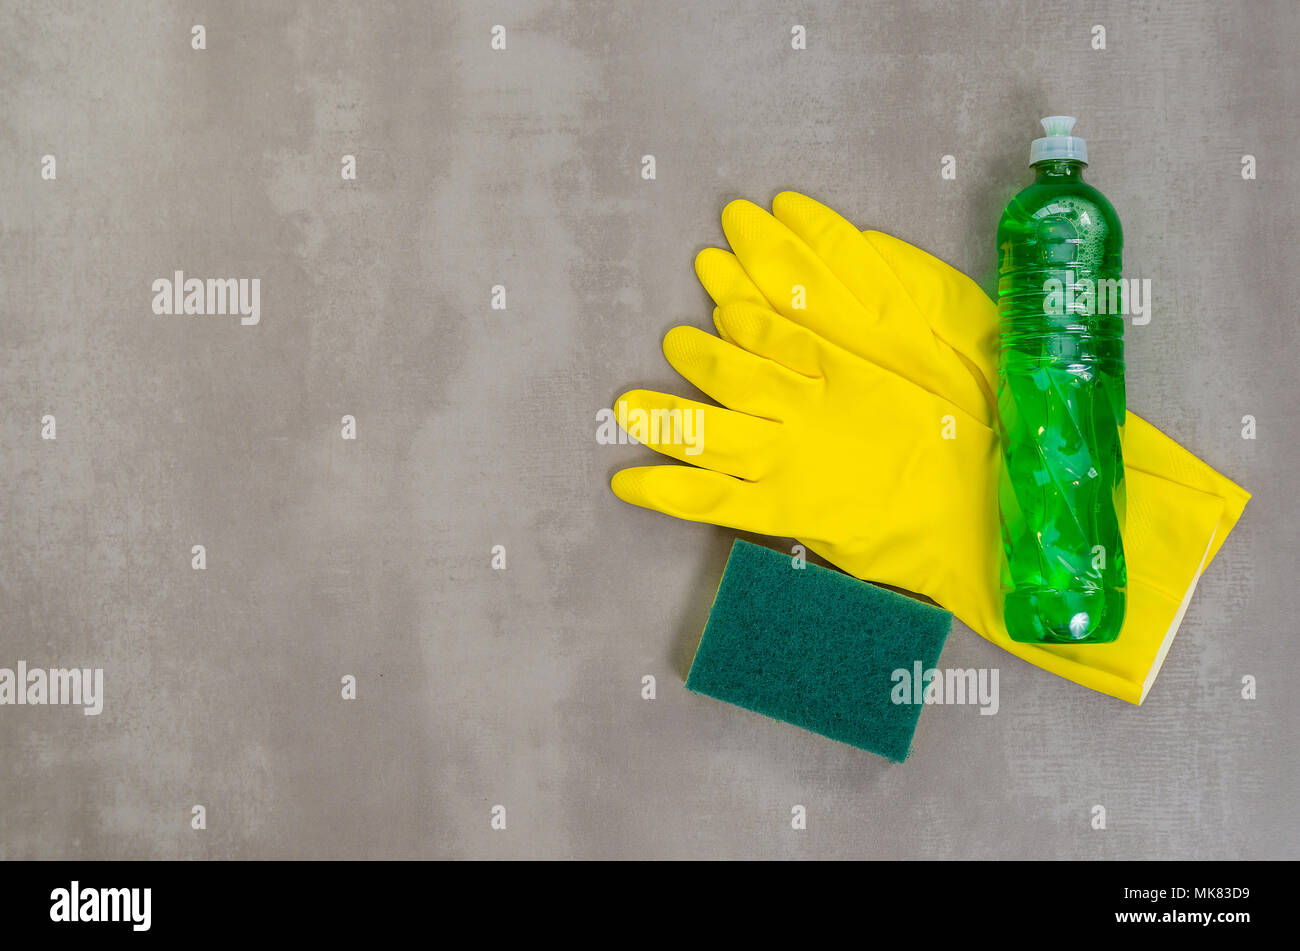 Great concept of cleaning, various products used in cleaning on gray background. Stock Photo